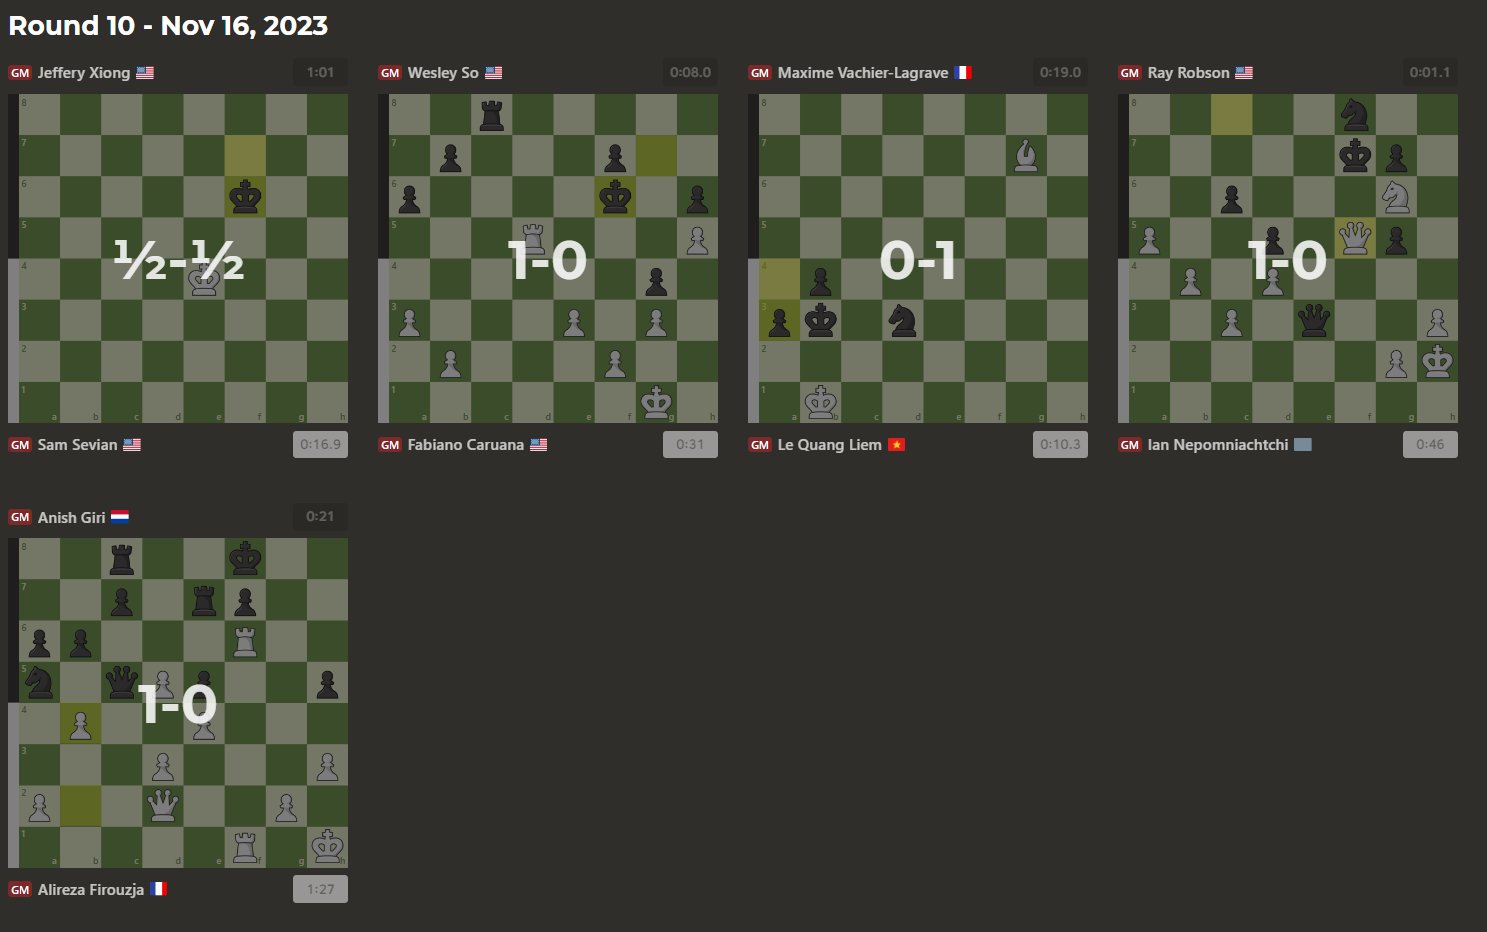 chess24.com on X: There was just 1 draw in Round 7 of the